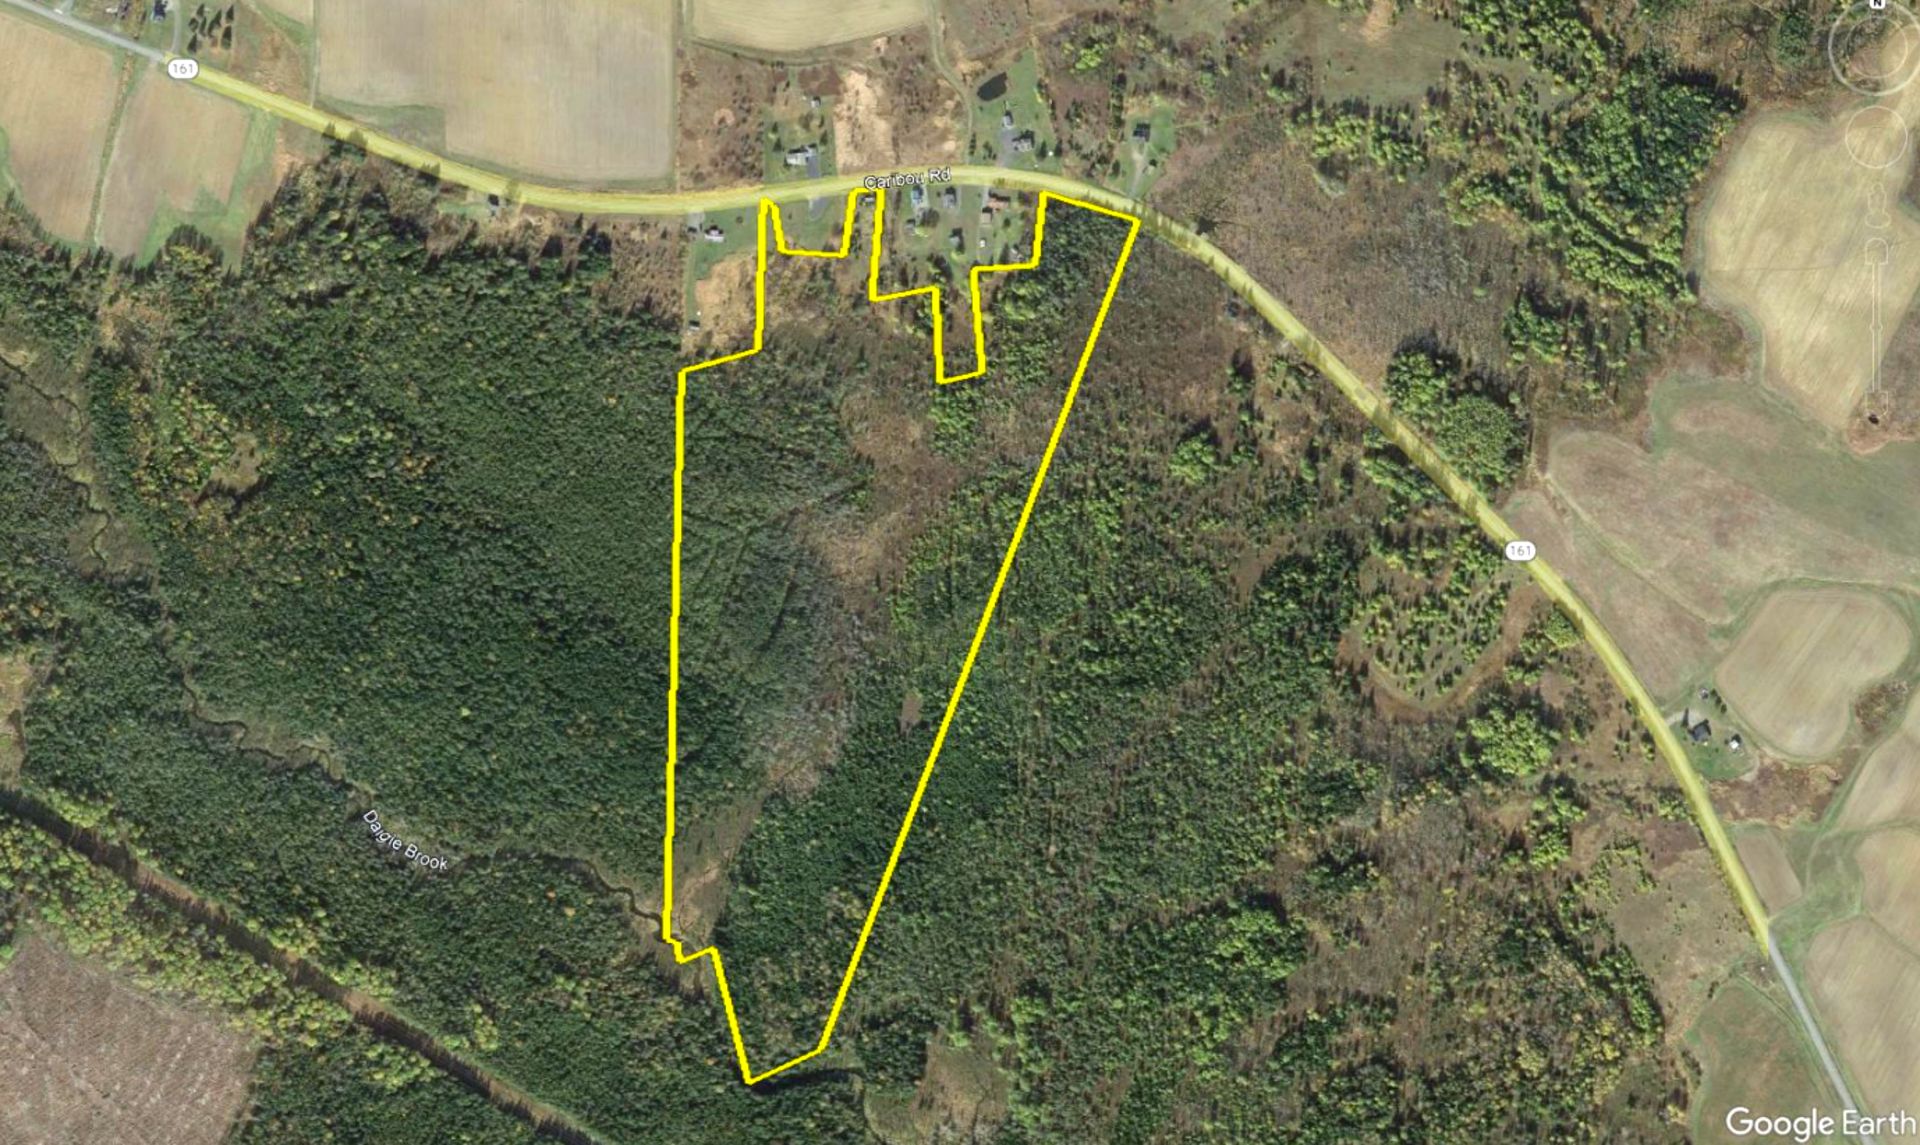 56 Buildable Acres on Route 161 in Aroostook County, Maine!